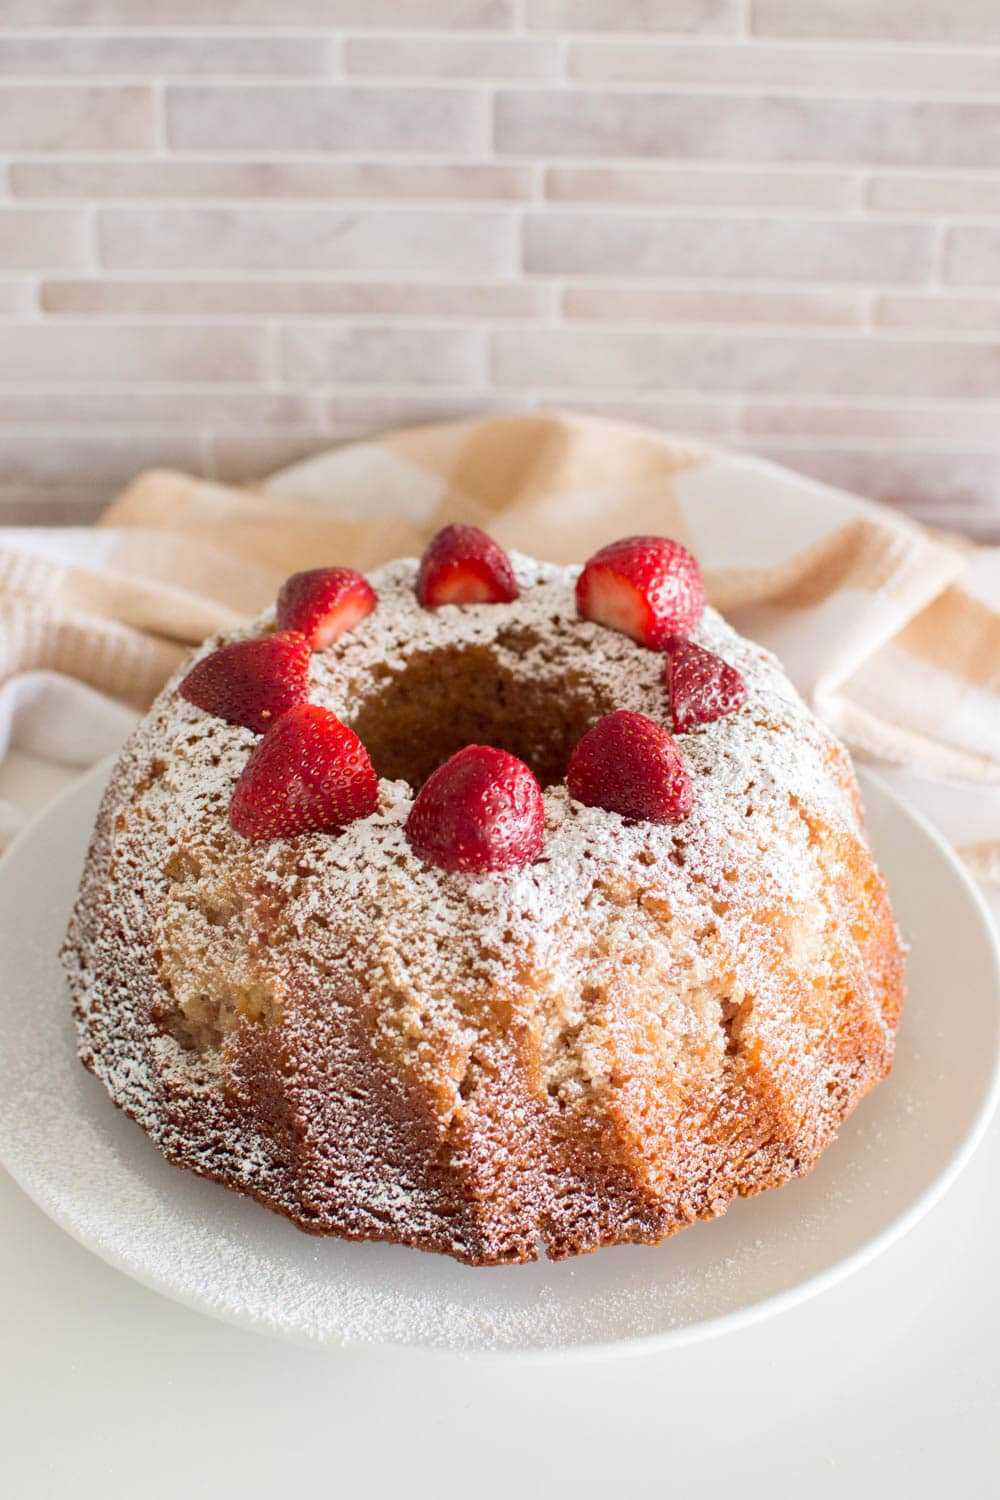 A bundt cake with powdered sugar and strawberries on top